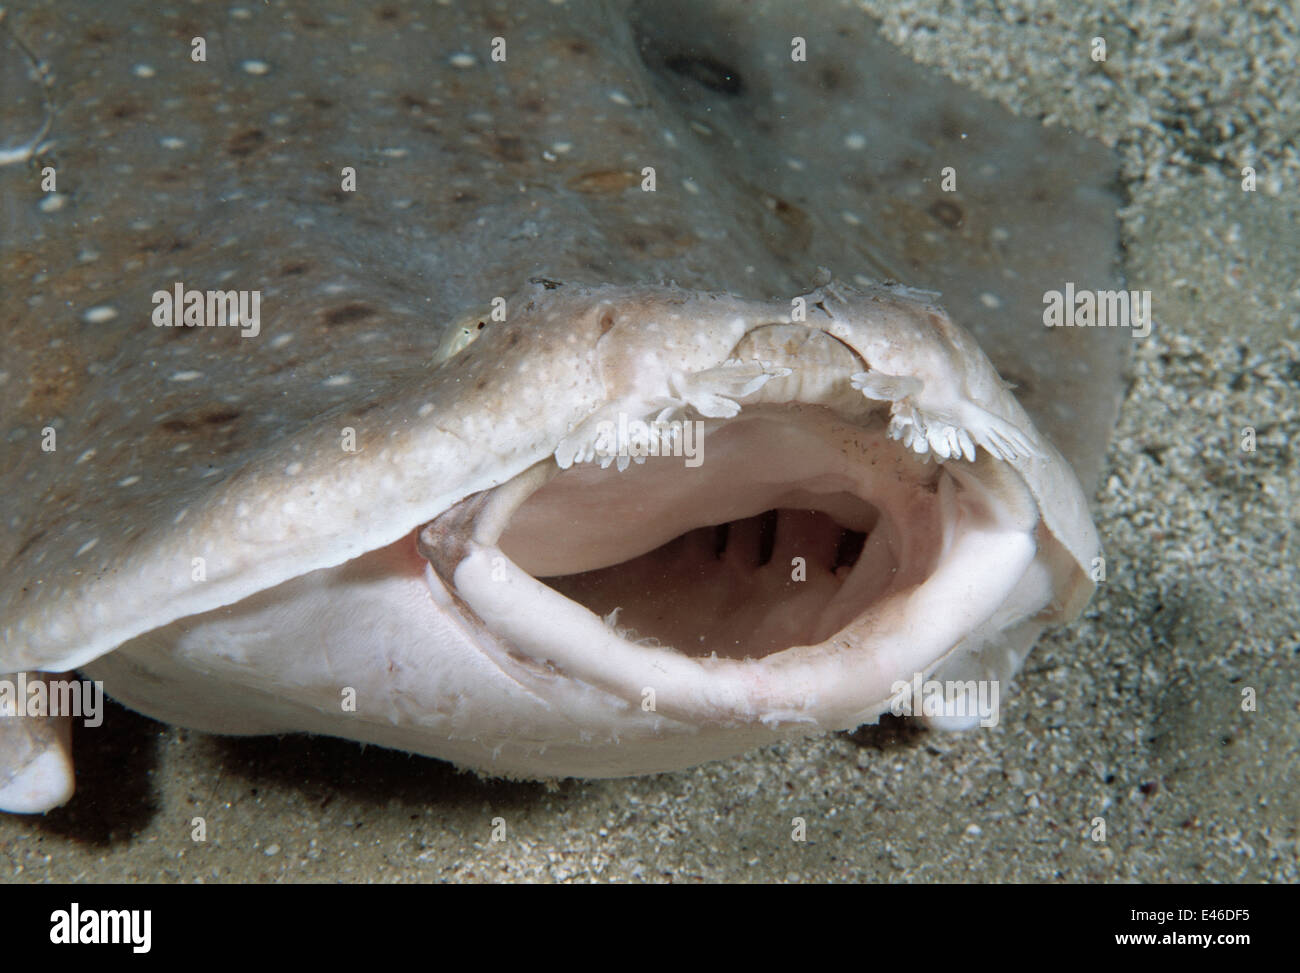 Eastern Angel Shark (Squatina albipunctata) in feeding and threat posture. Worlds first underwater photographs of this species. Stock Photo